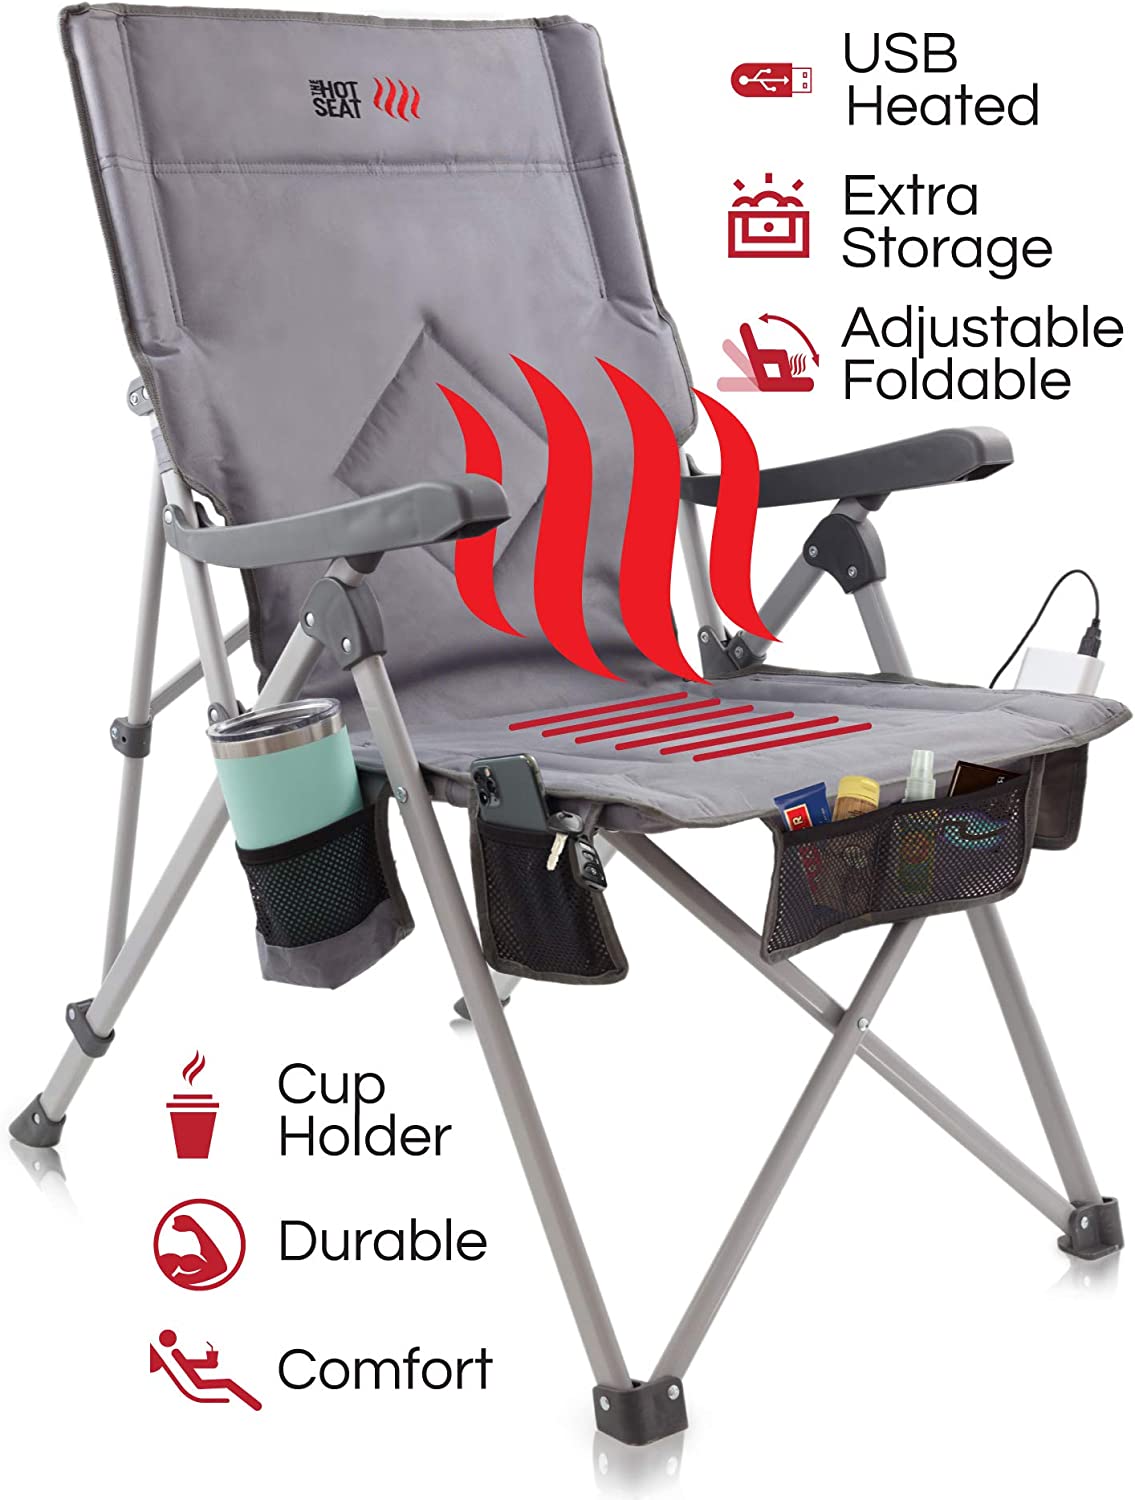 POP Design The Hot Seat, Heated Portable Chair